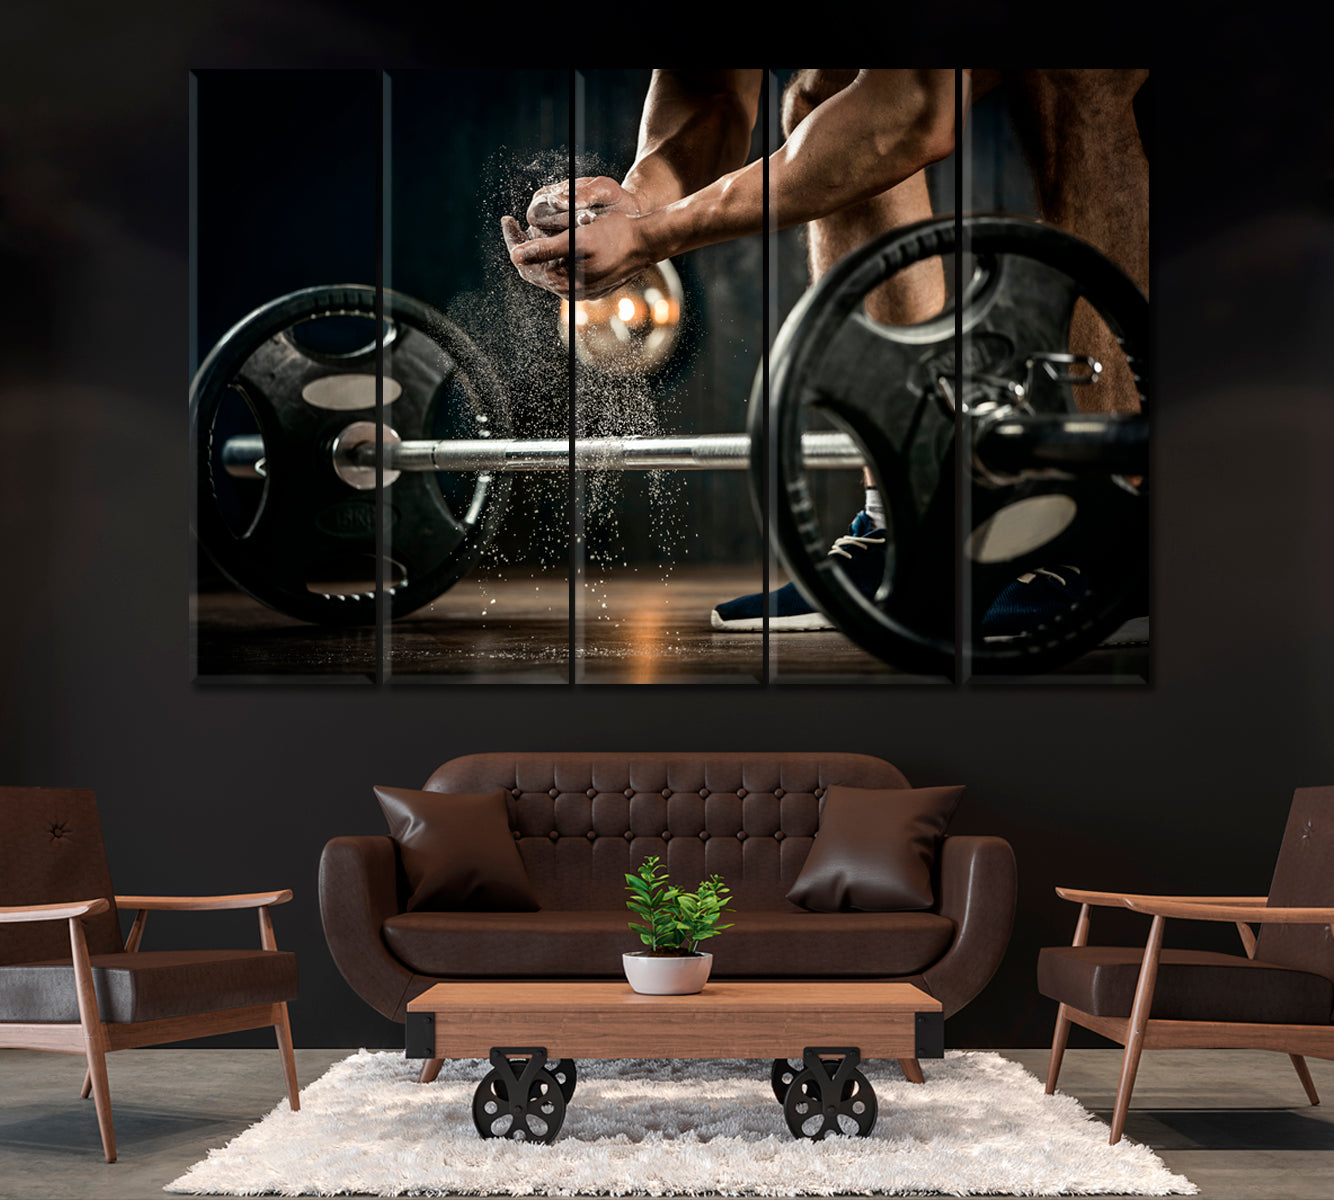 Powerlifter with Barbell Canvas Print ArtLexy 5 Panels 36"x24" inches 